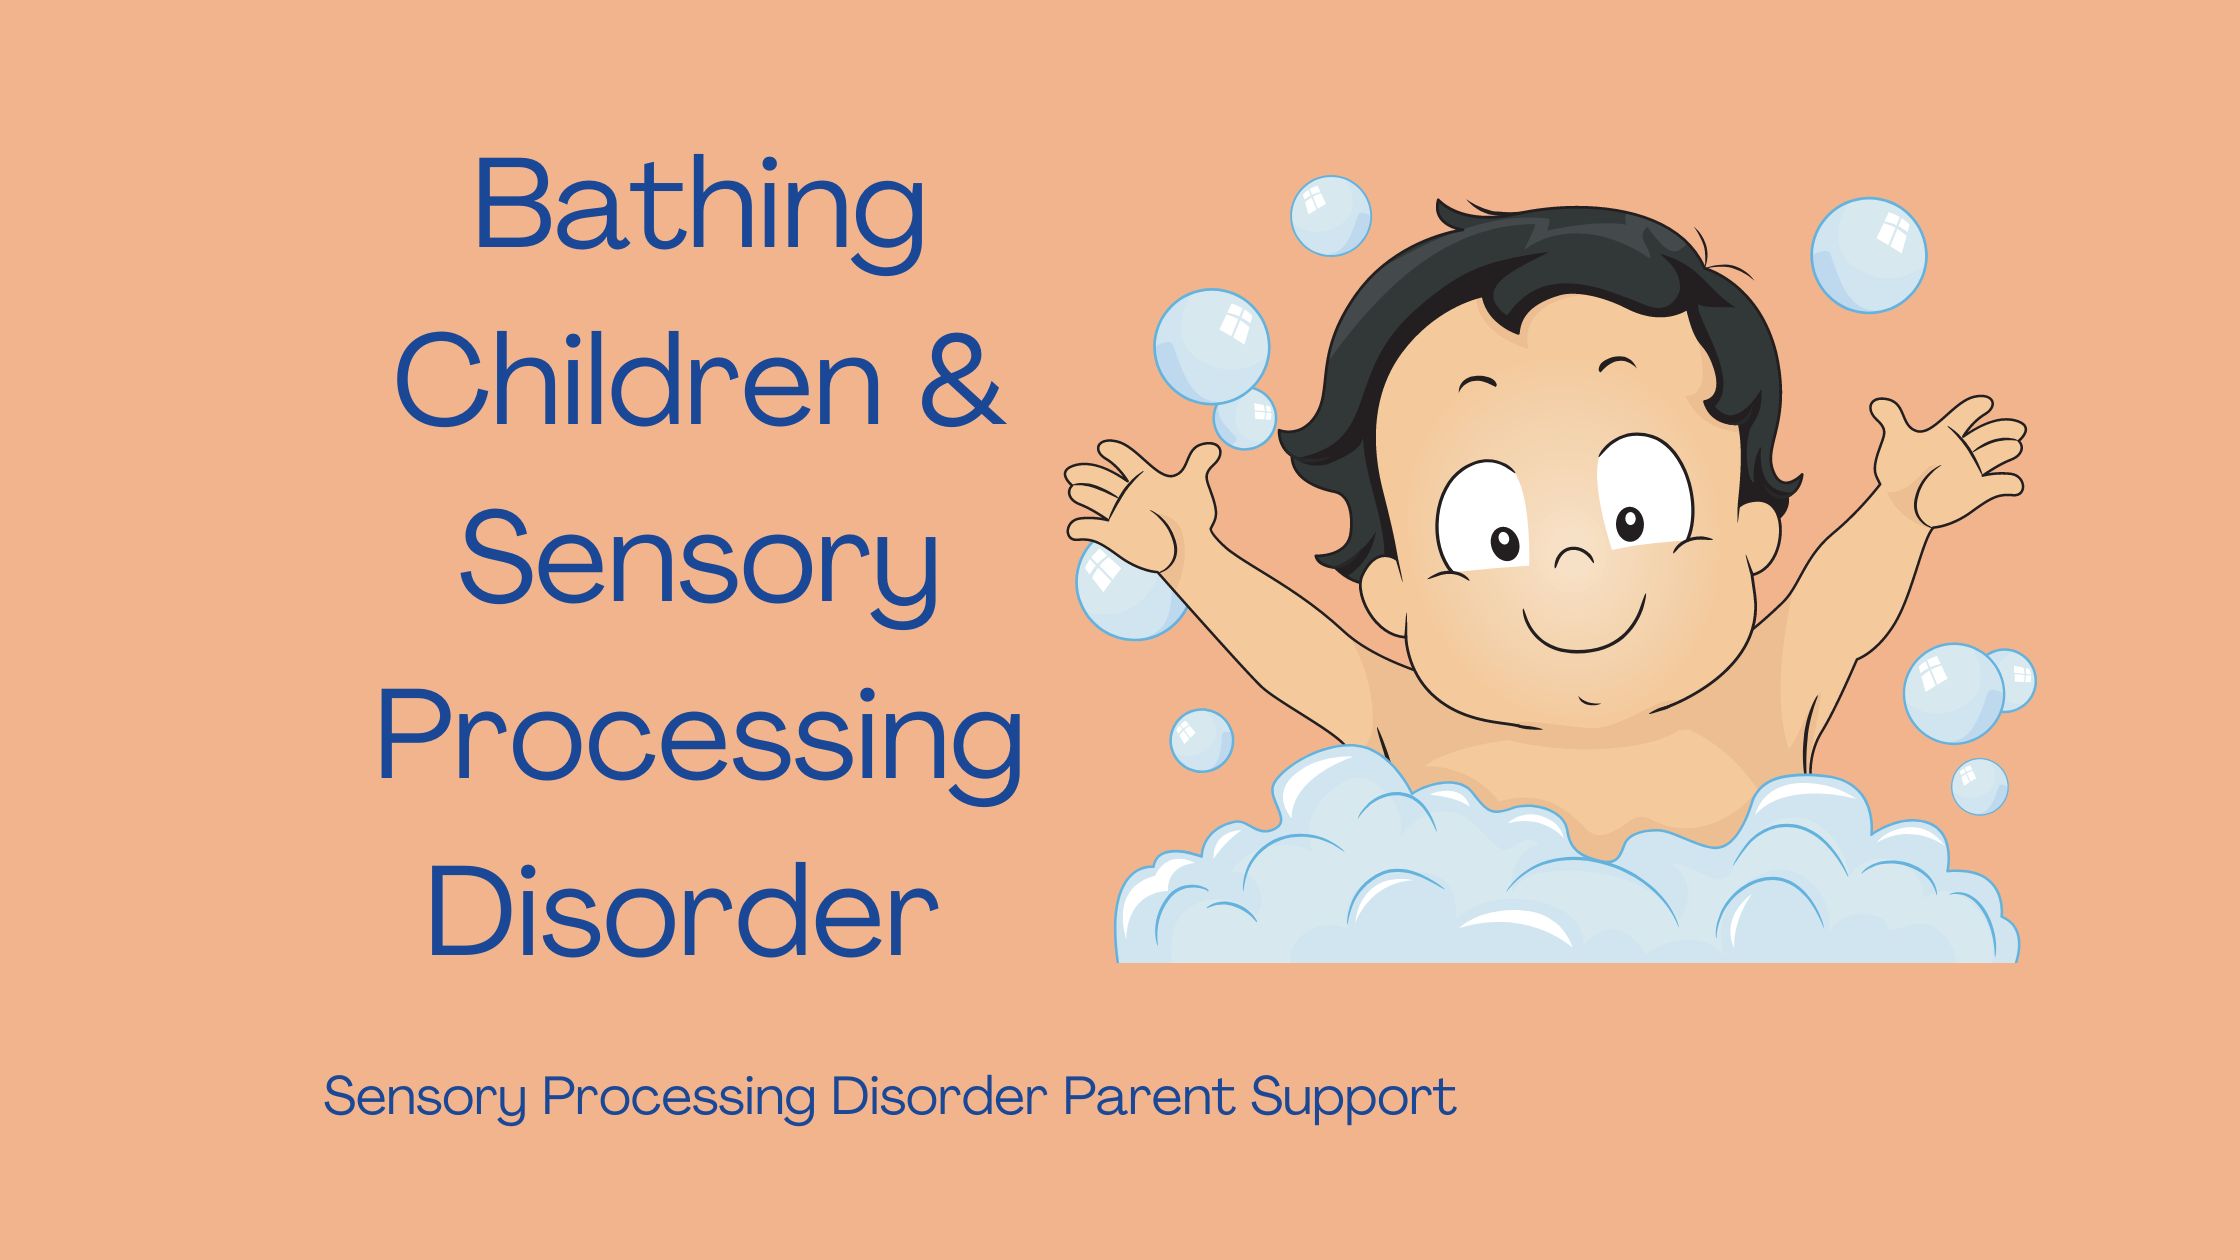 child with sensory processing disorder having a bubble bath Bathing Children & Sensory Processing Disorder